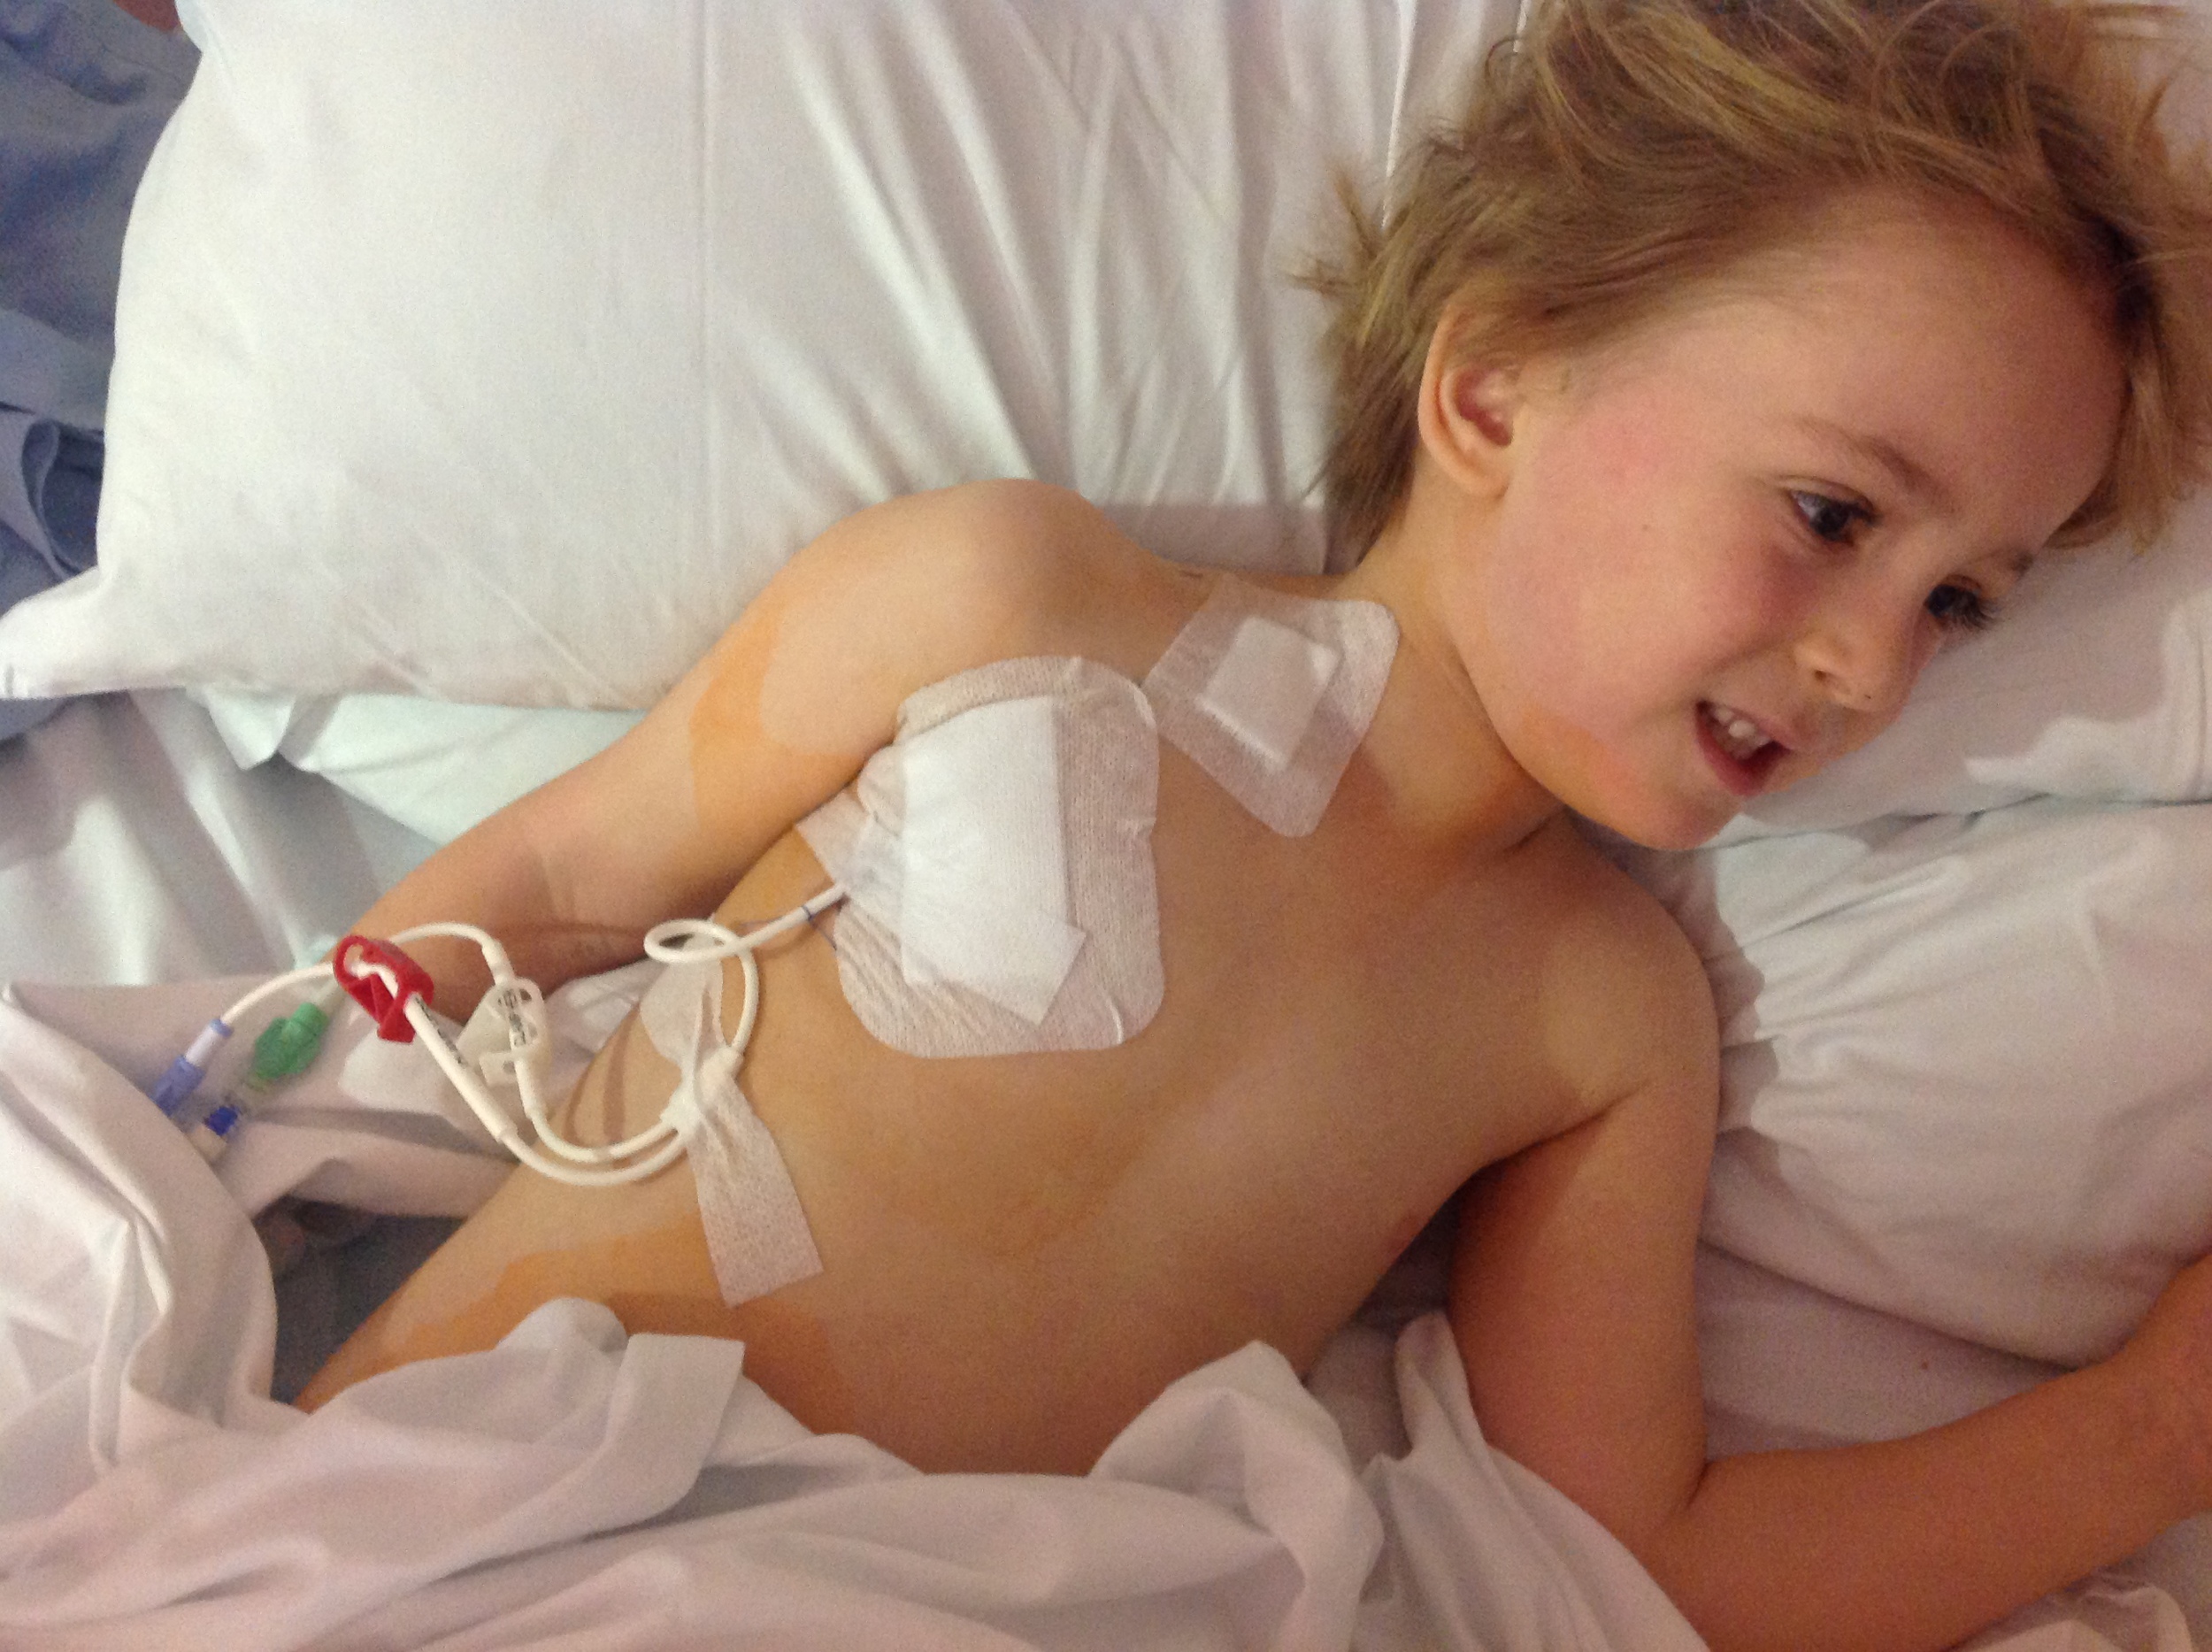 Hickman Line - vascular catheter inserted directly into the heart to maximise flow of drugs around the body.